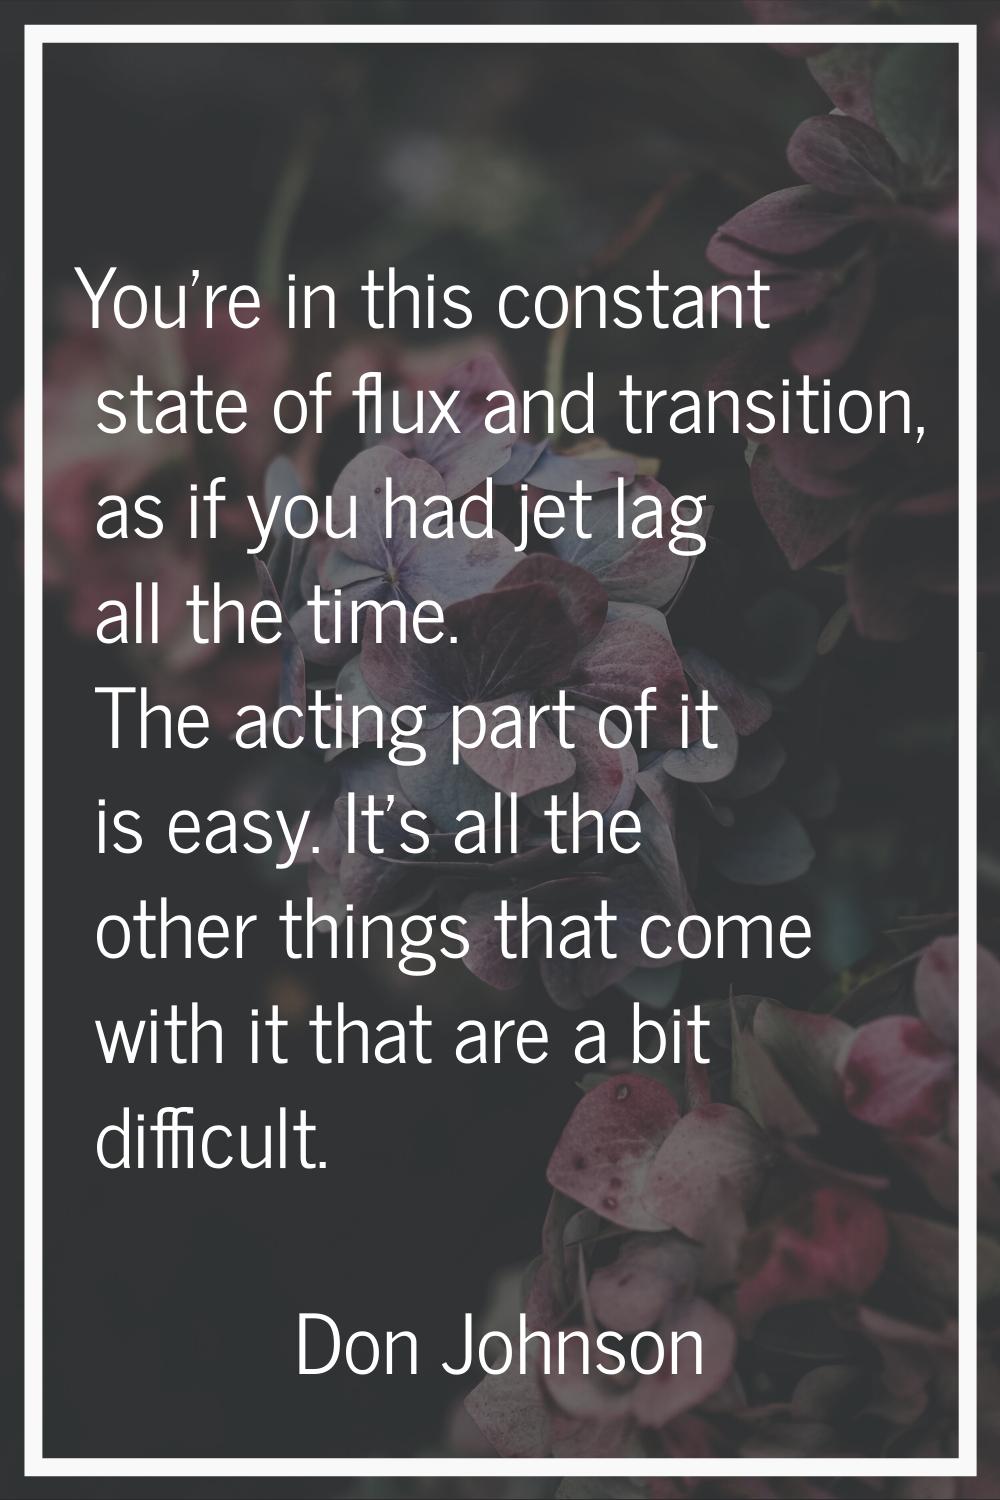 You're in this constant state of flux and transition, as if you had jet lag all the time. The actin